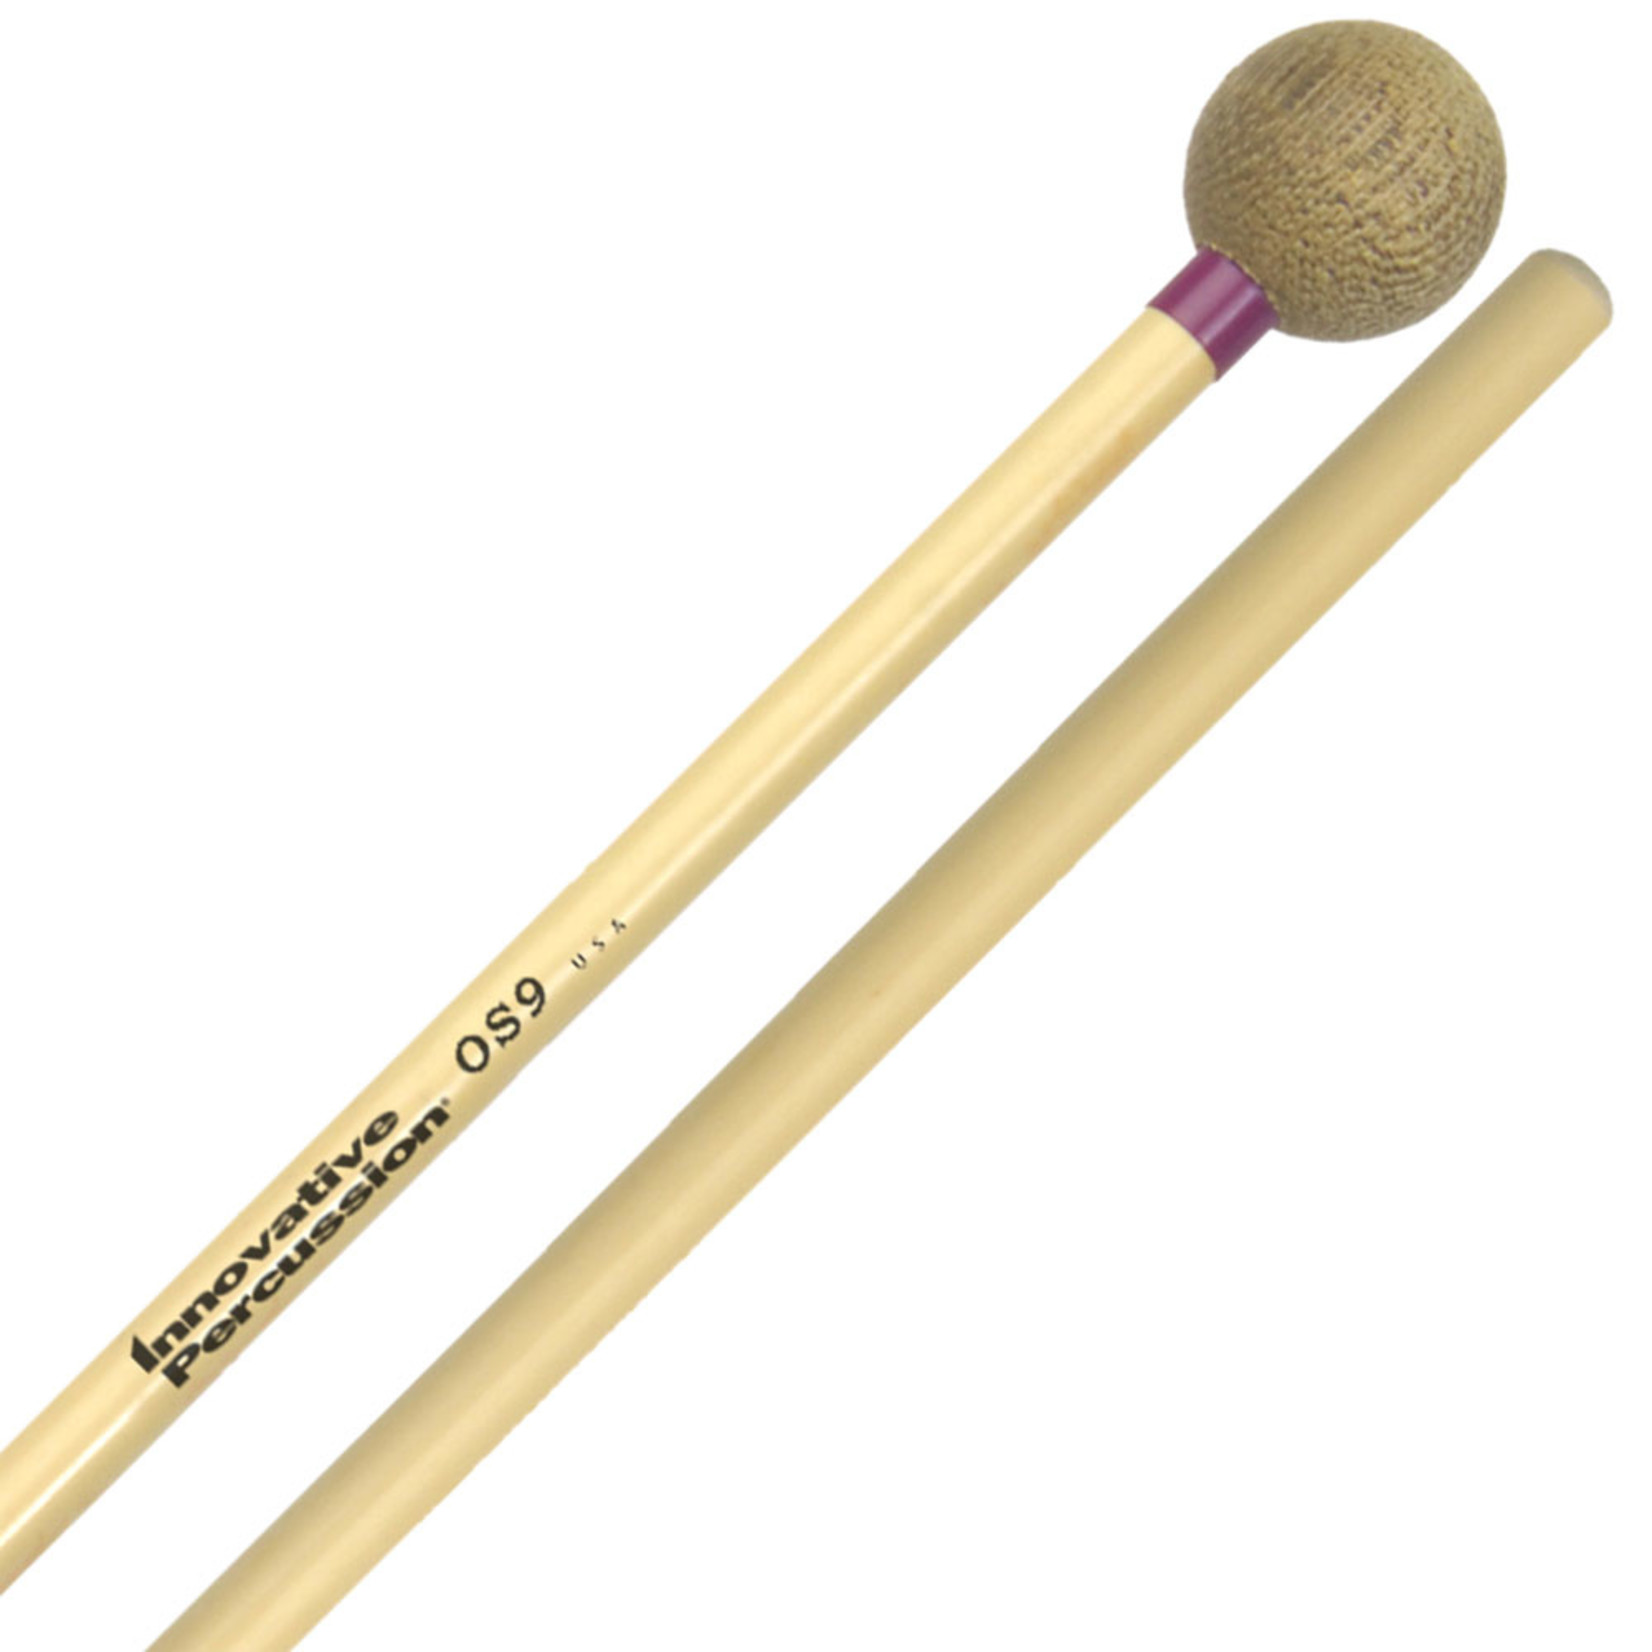 Innovative Percussion OS9 Orchestral Series MEDIUM GLOCKENSPIEL / XYLOPHONE MALLETS